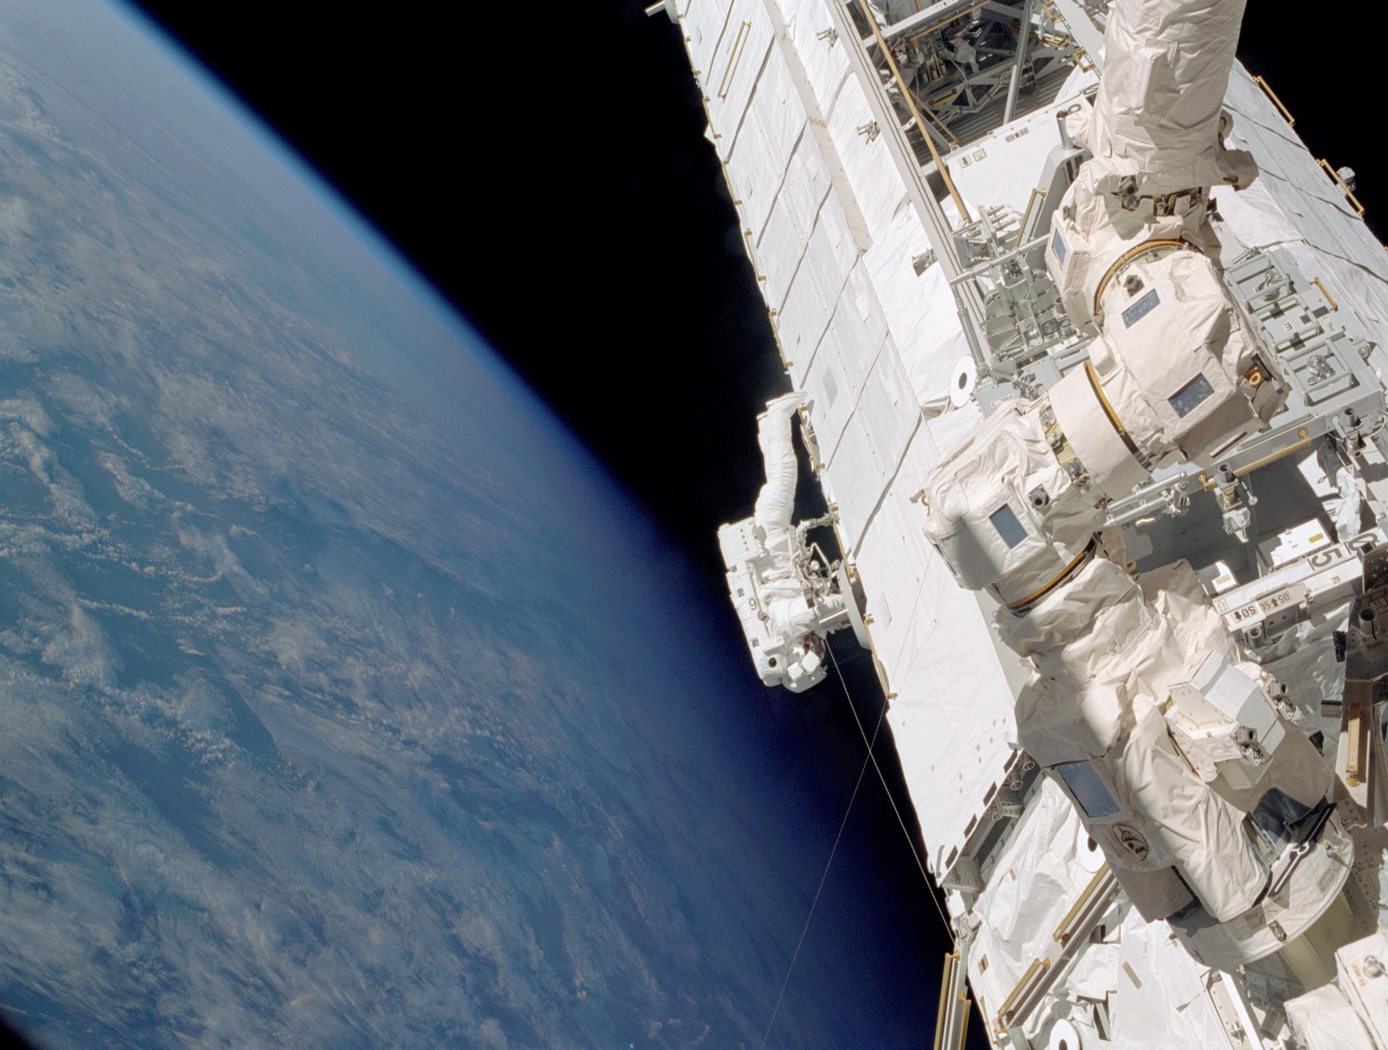 View of STS-112 Mission specialist Piers Sellers translating across the S0 truss (forward side) during the first of three Extravehicular Activities (EVAs) of the mission.